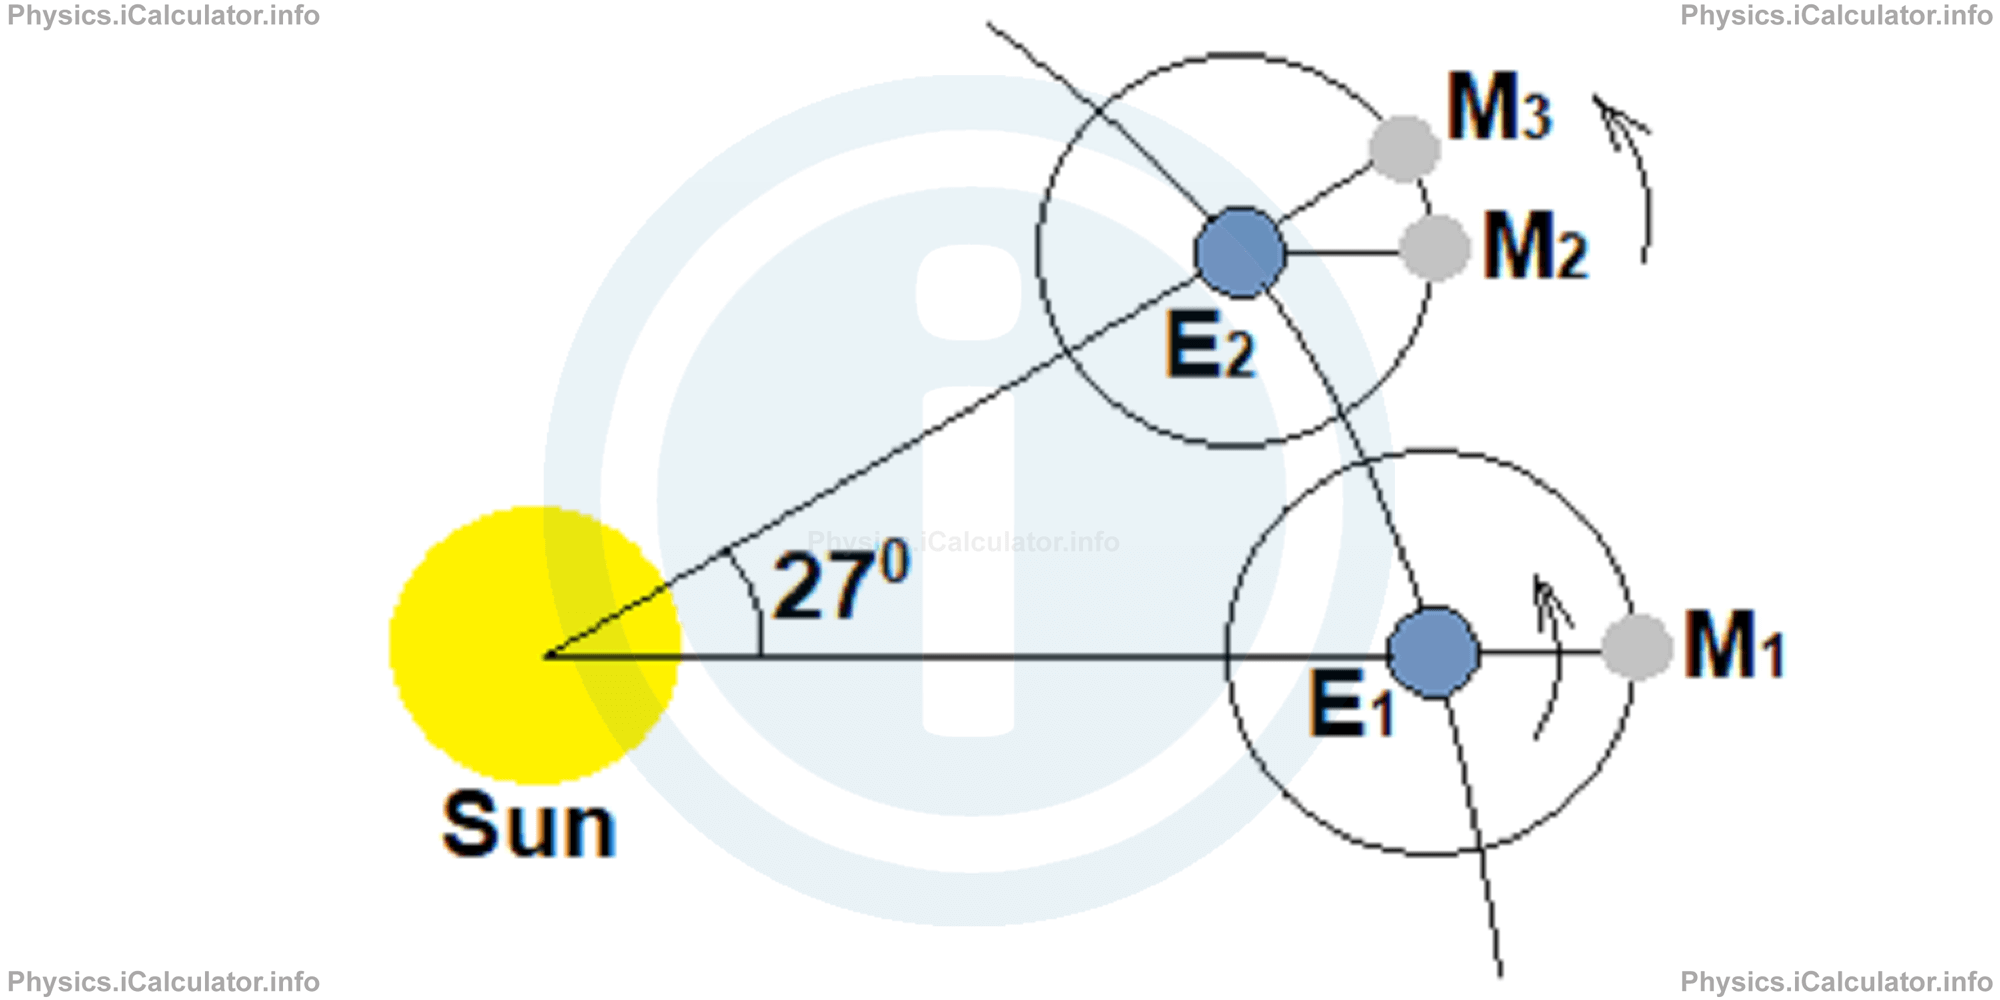 Physics Tutorials: This image provides visual information for the physics tutorial The Moon's Movement. Eclipses. Calendars 